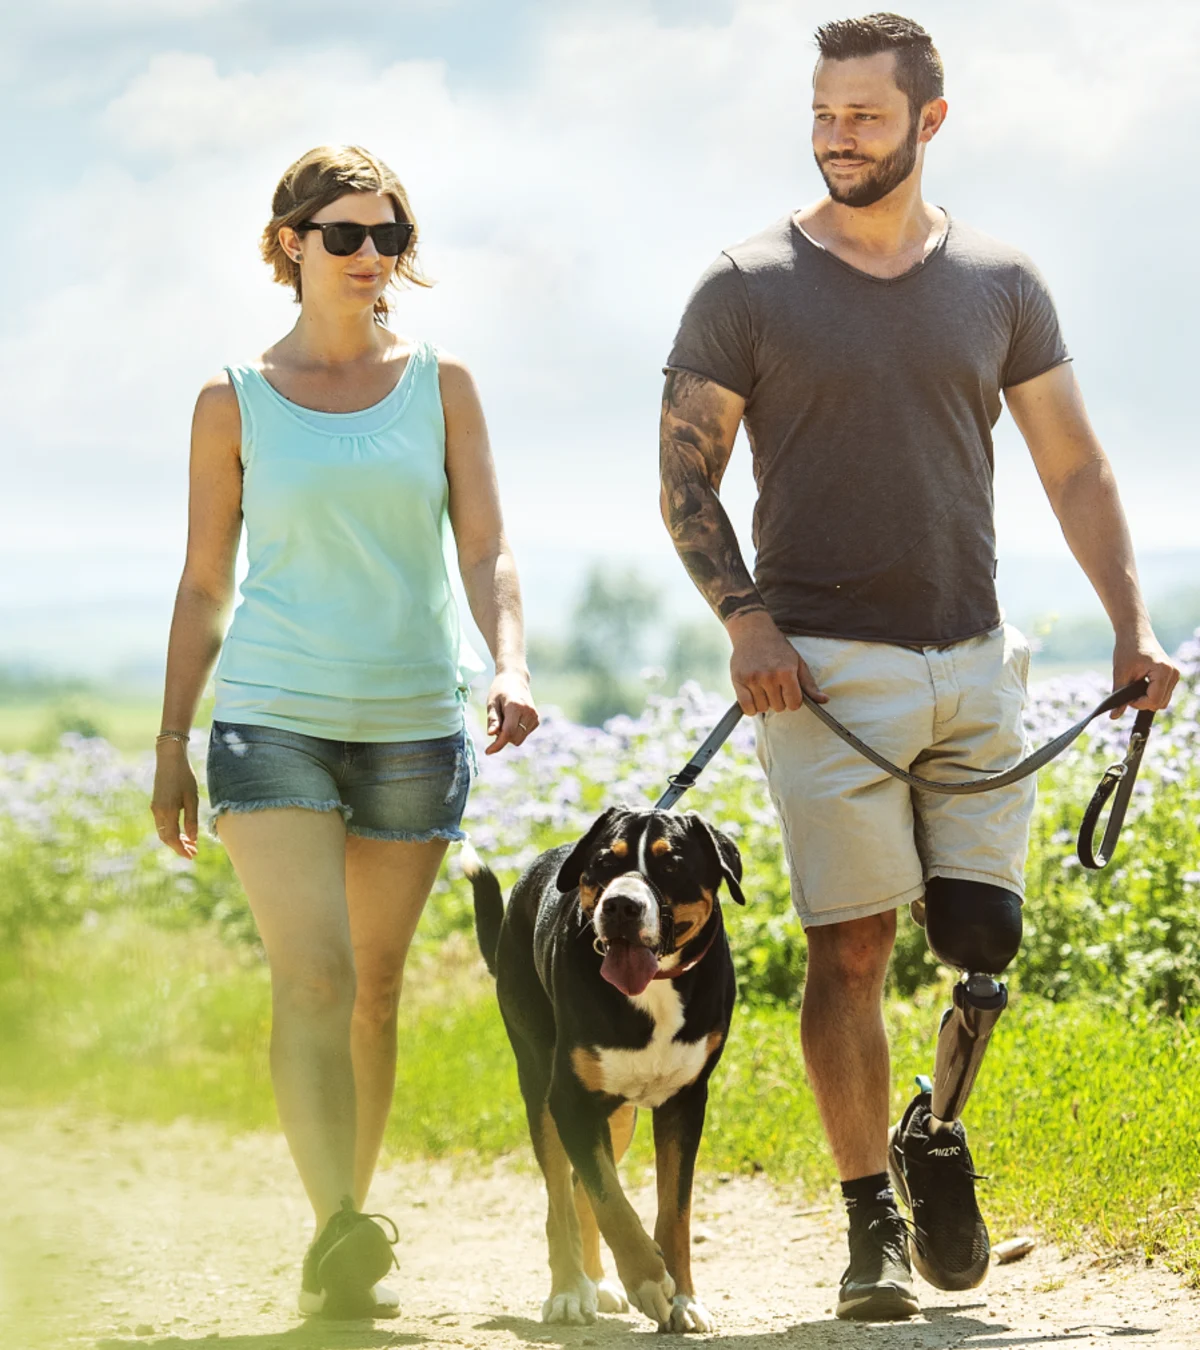 A couple walking their dog outside through a field of purple flowers using their custom Ottobock-manufactured C-Leg 